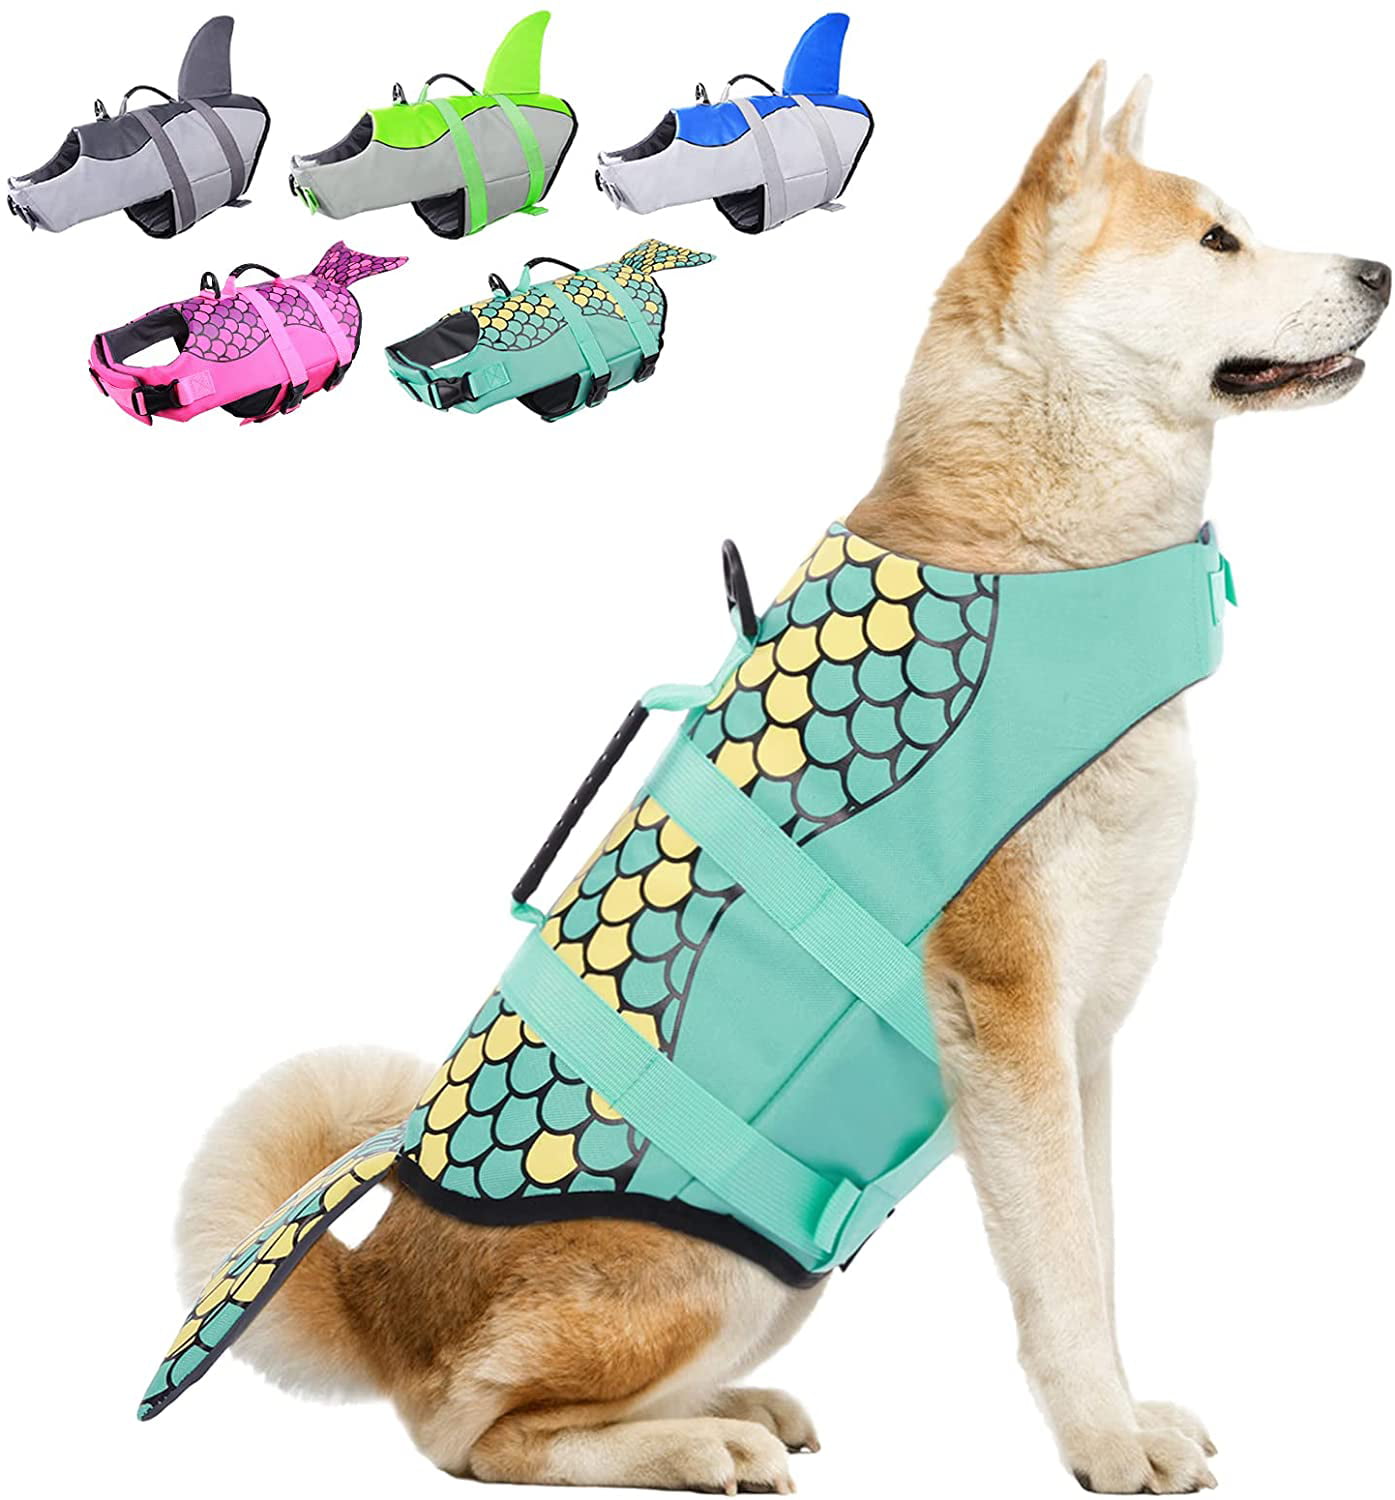 EMUST Dog Life Jacket Shark Pet Safety Swimsuit Preserver for Swimming Pool Beach Boating Ripstop Dog Lifesaver Vests with Rescue Handle for Small Medium and Large Dogs 